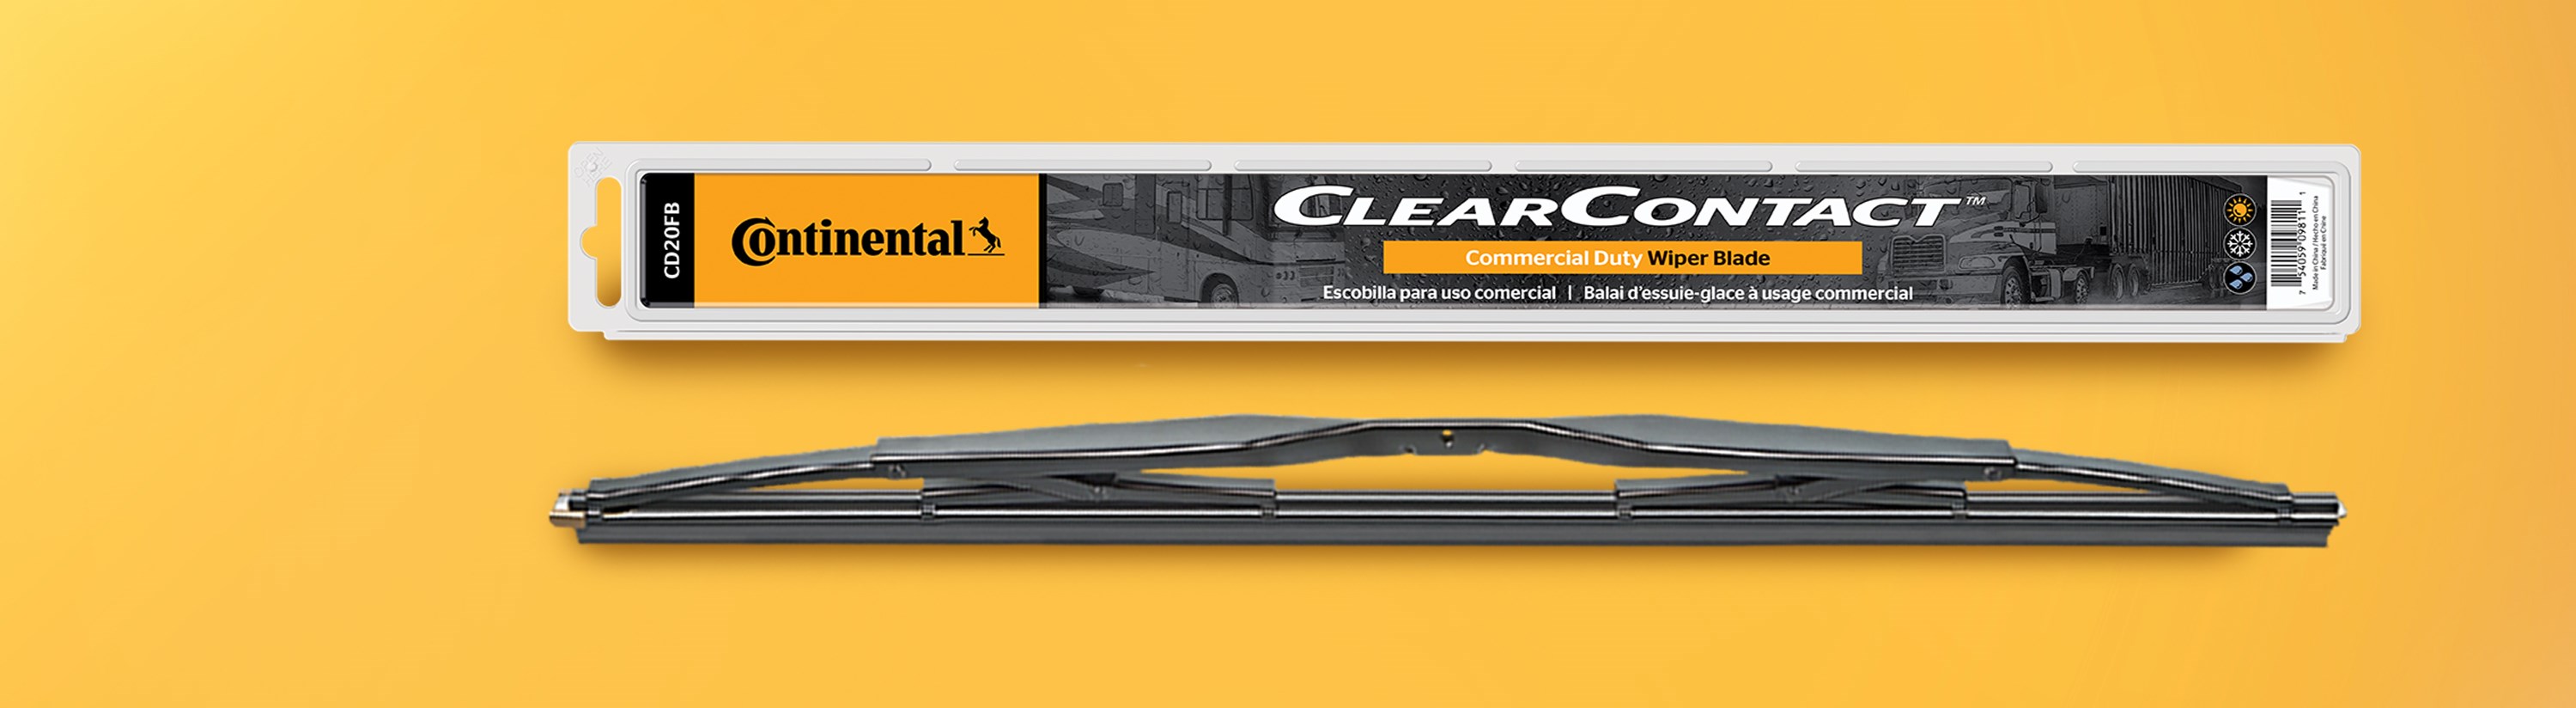 Clearcontact-Commercial-Duty-Wiper-Blades-Header